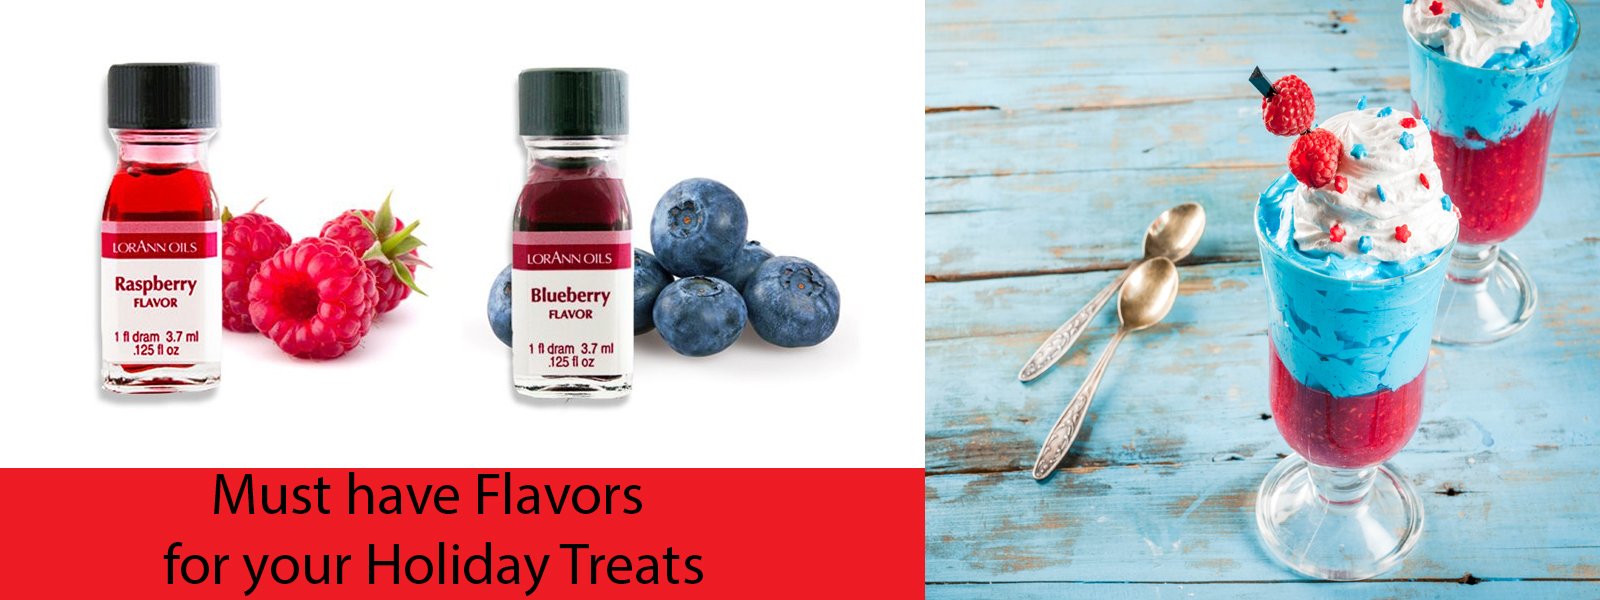 Fun flavors for candies and holiday treats!